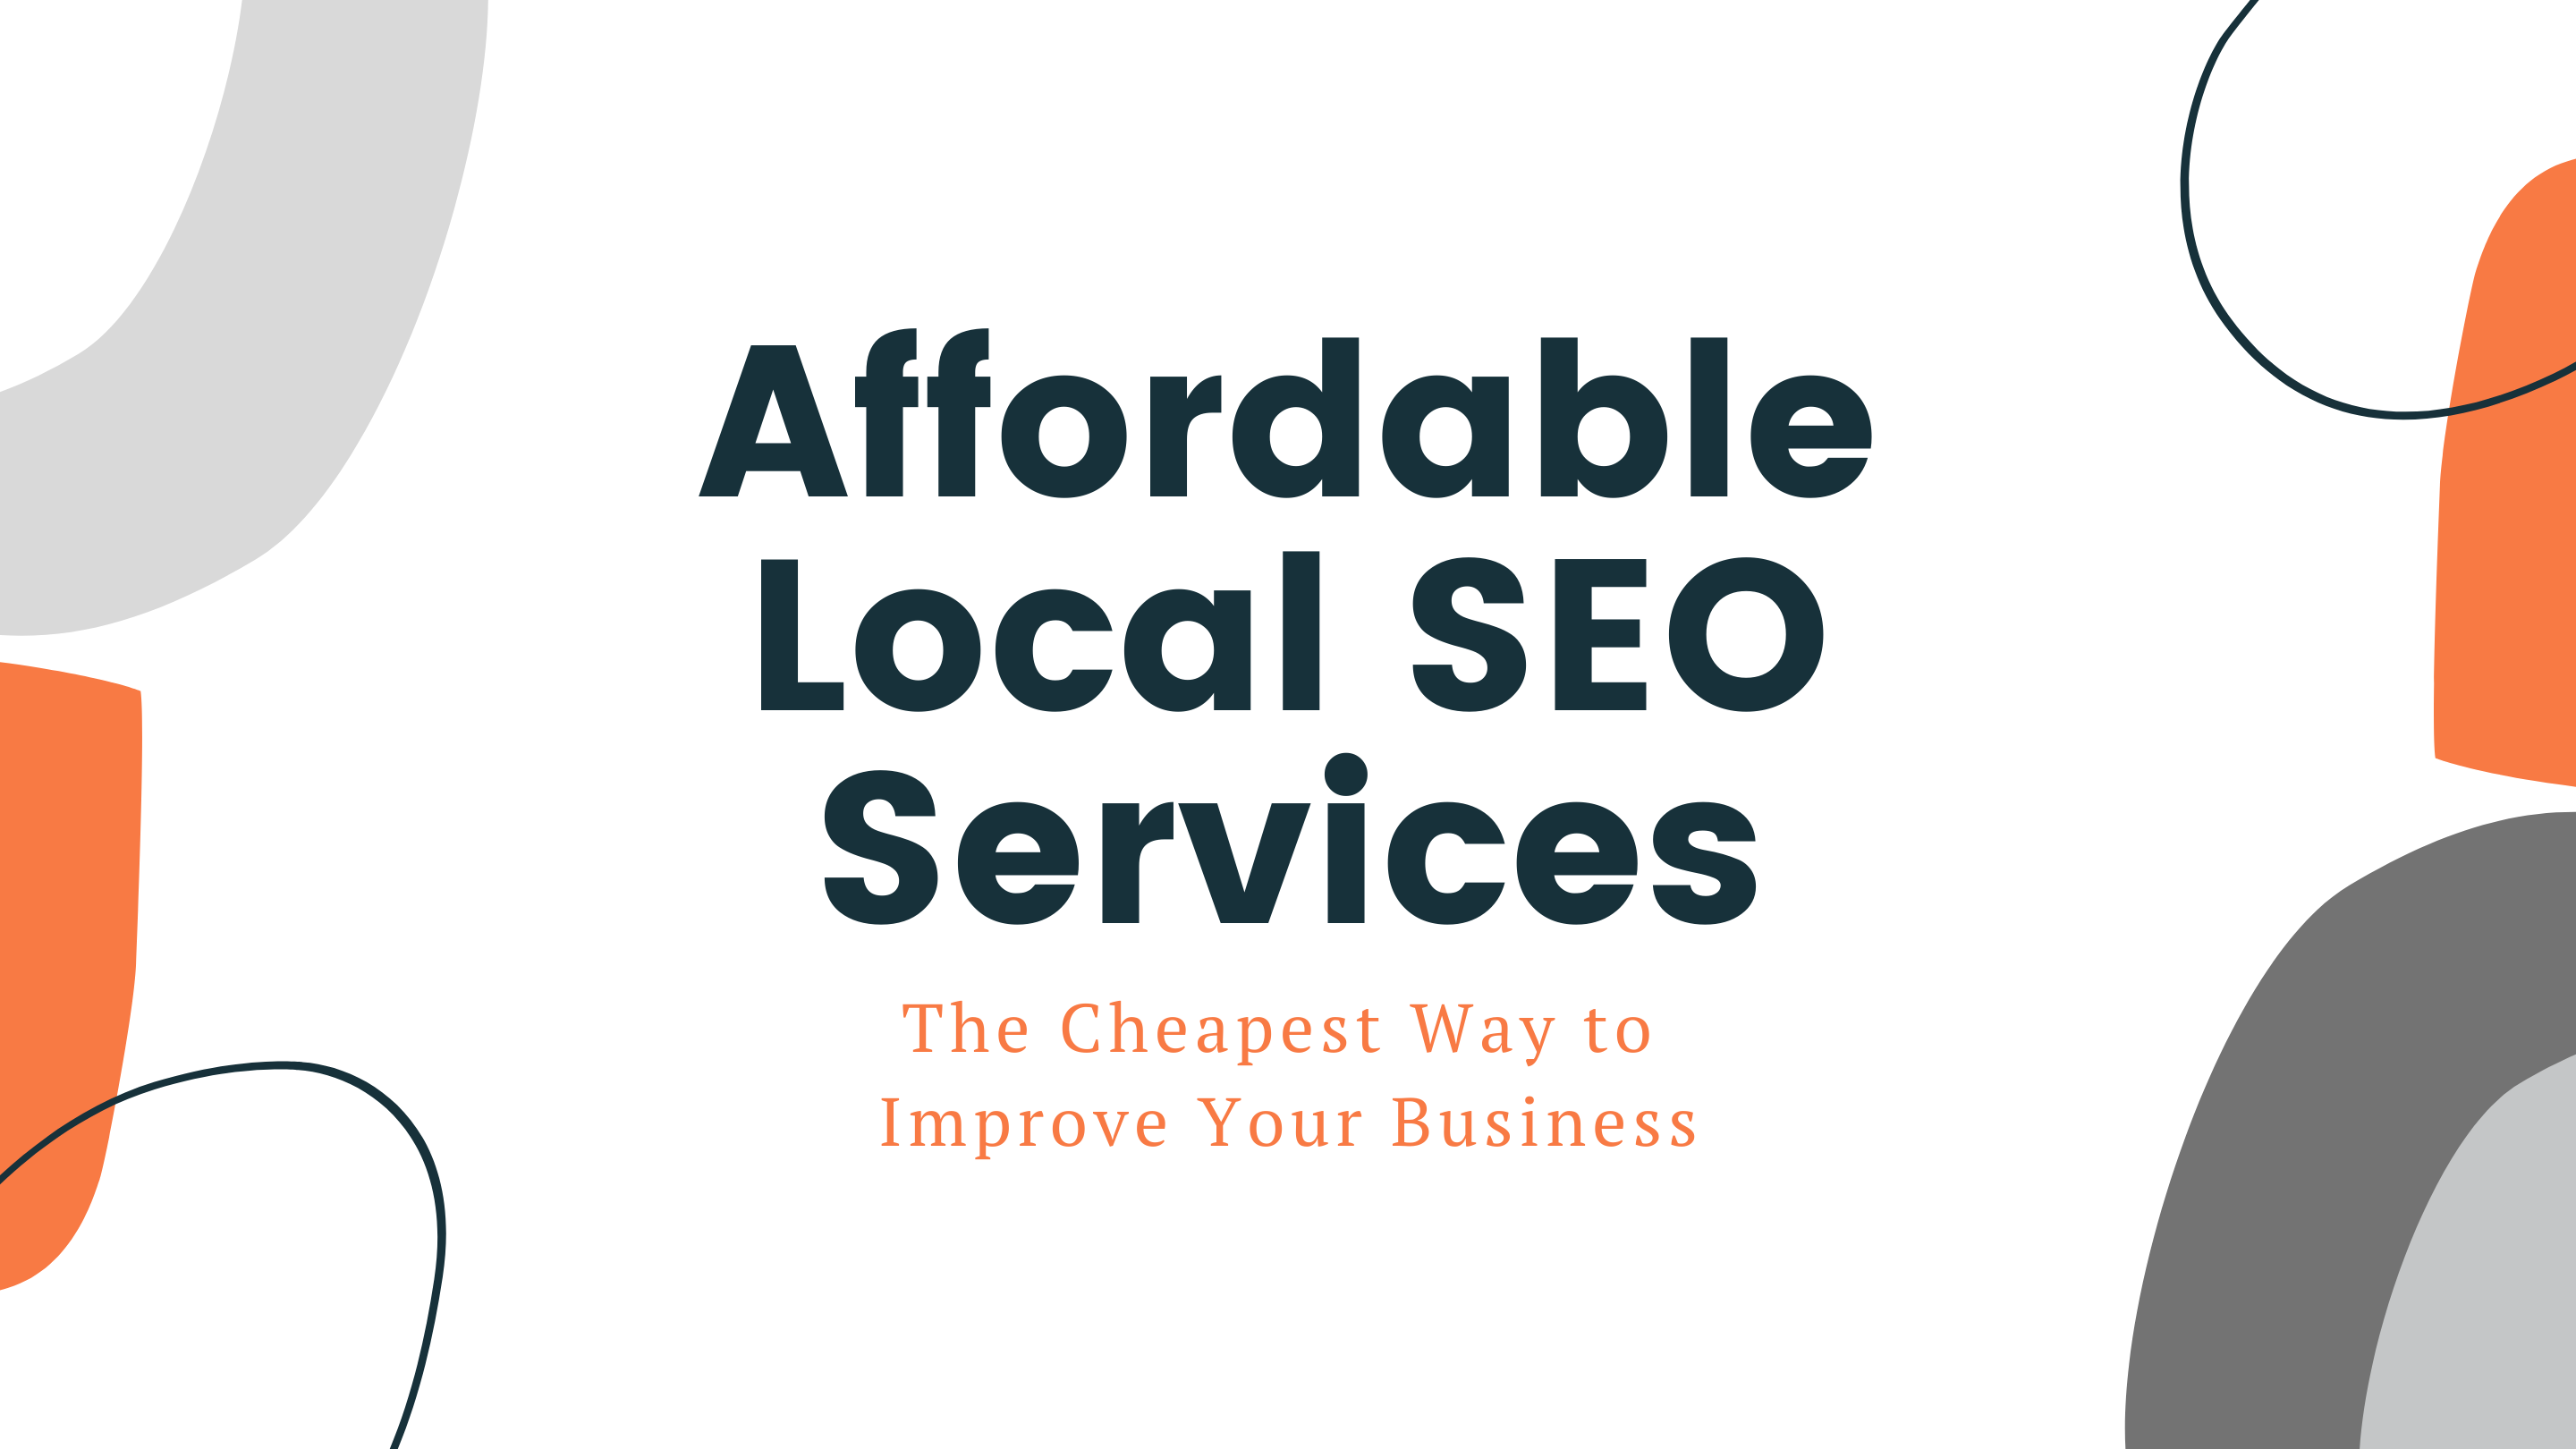 How to Find the Right SEO Service for Your Small Business - WordStream